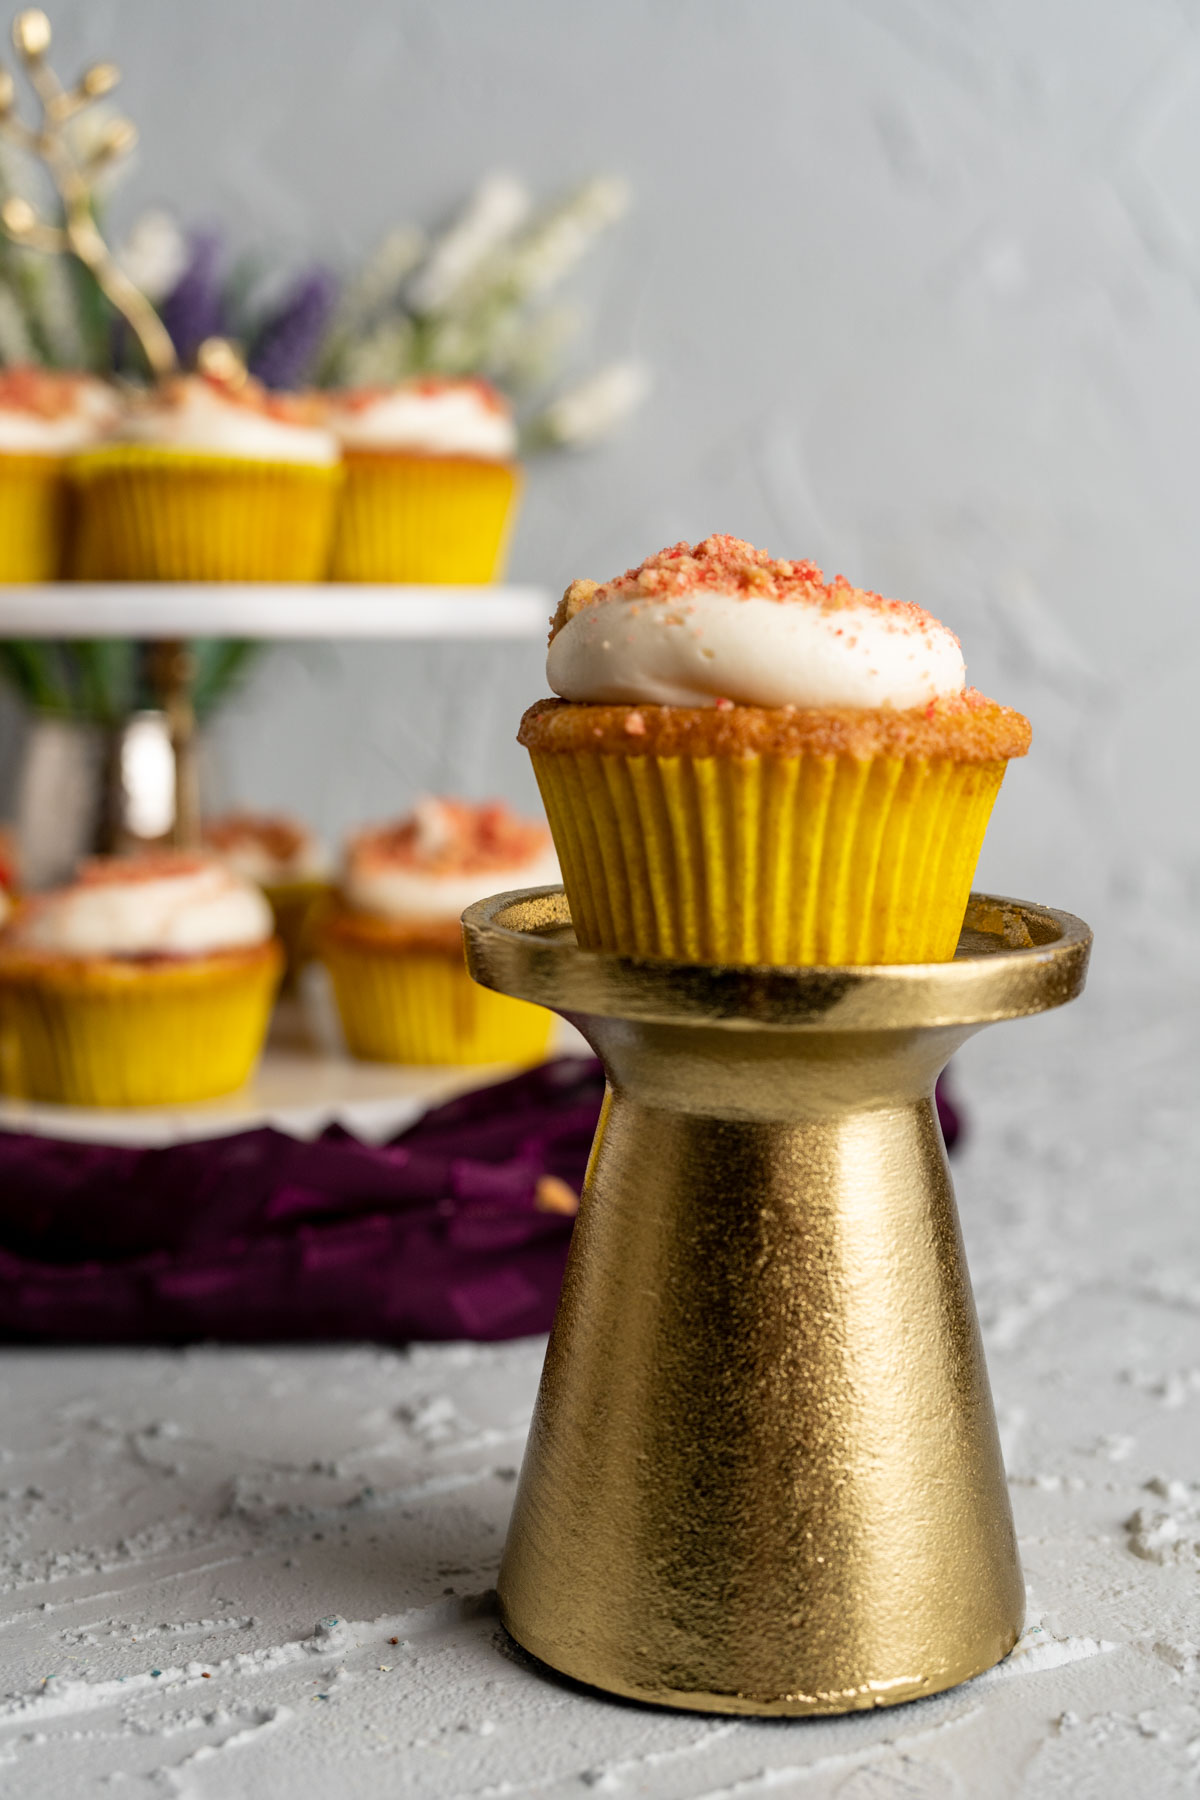 cupcake sitting on a golden stand with other cupcakes in the backdrop.